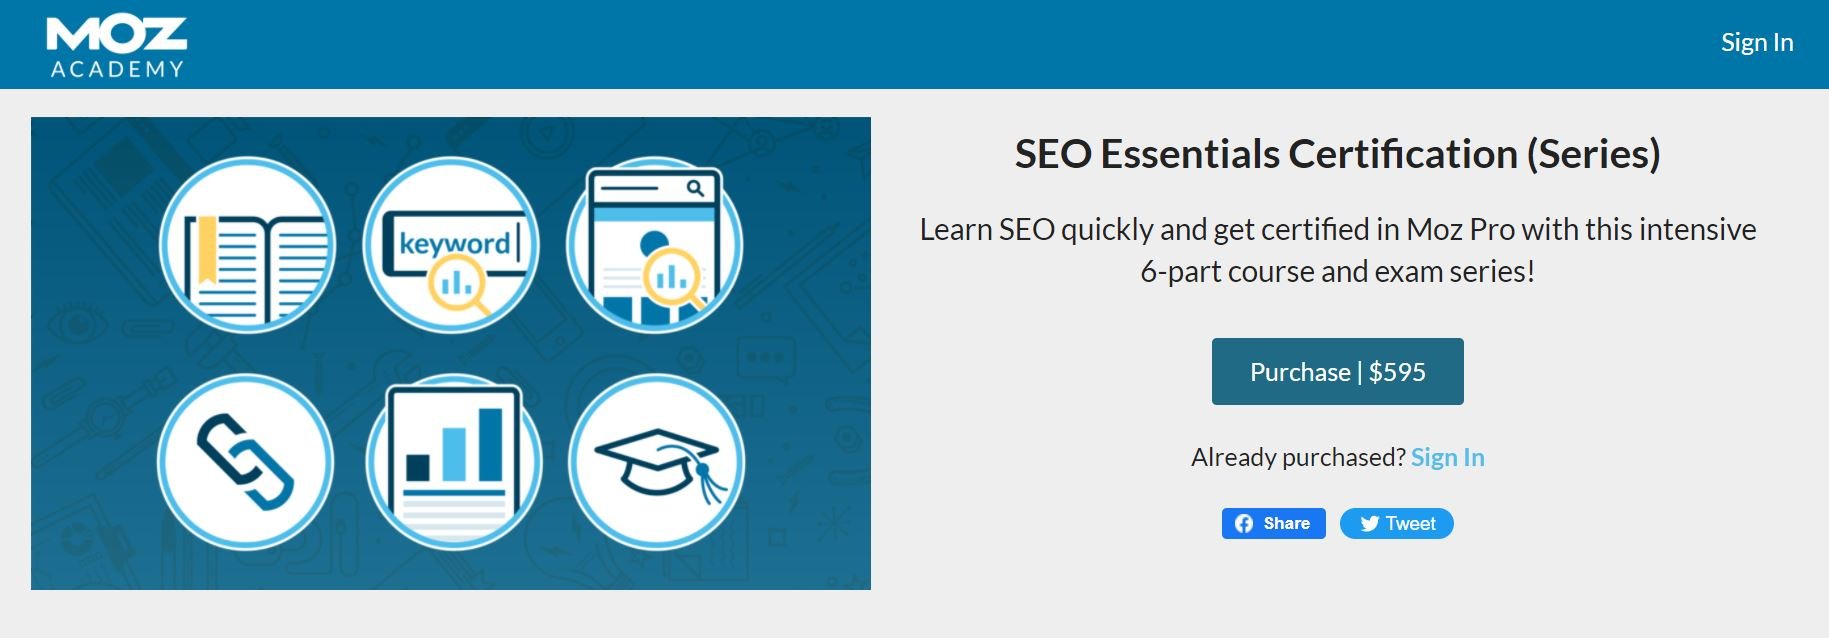 7-best-seo-training-courses-to-take-right-now-6 7 最好的 SEO 培训课程现在就参加